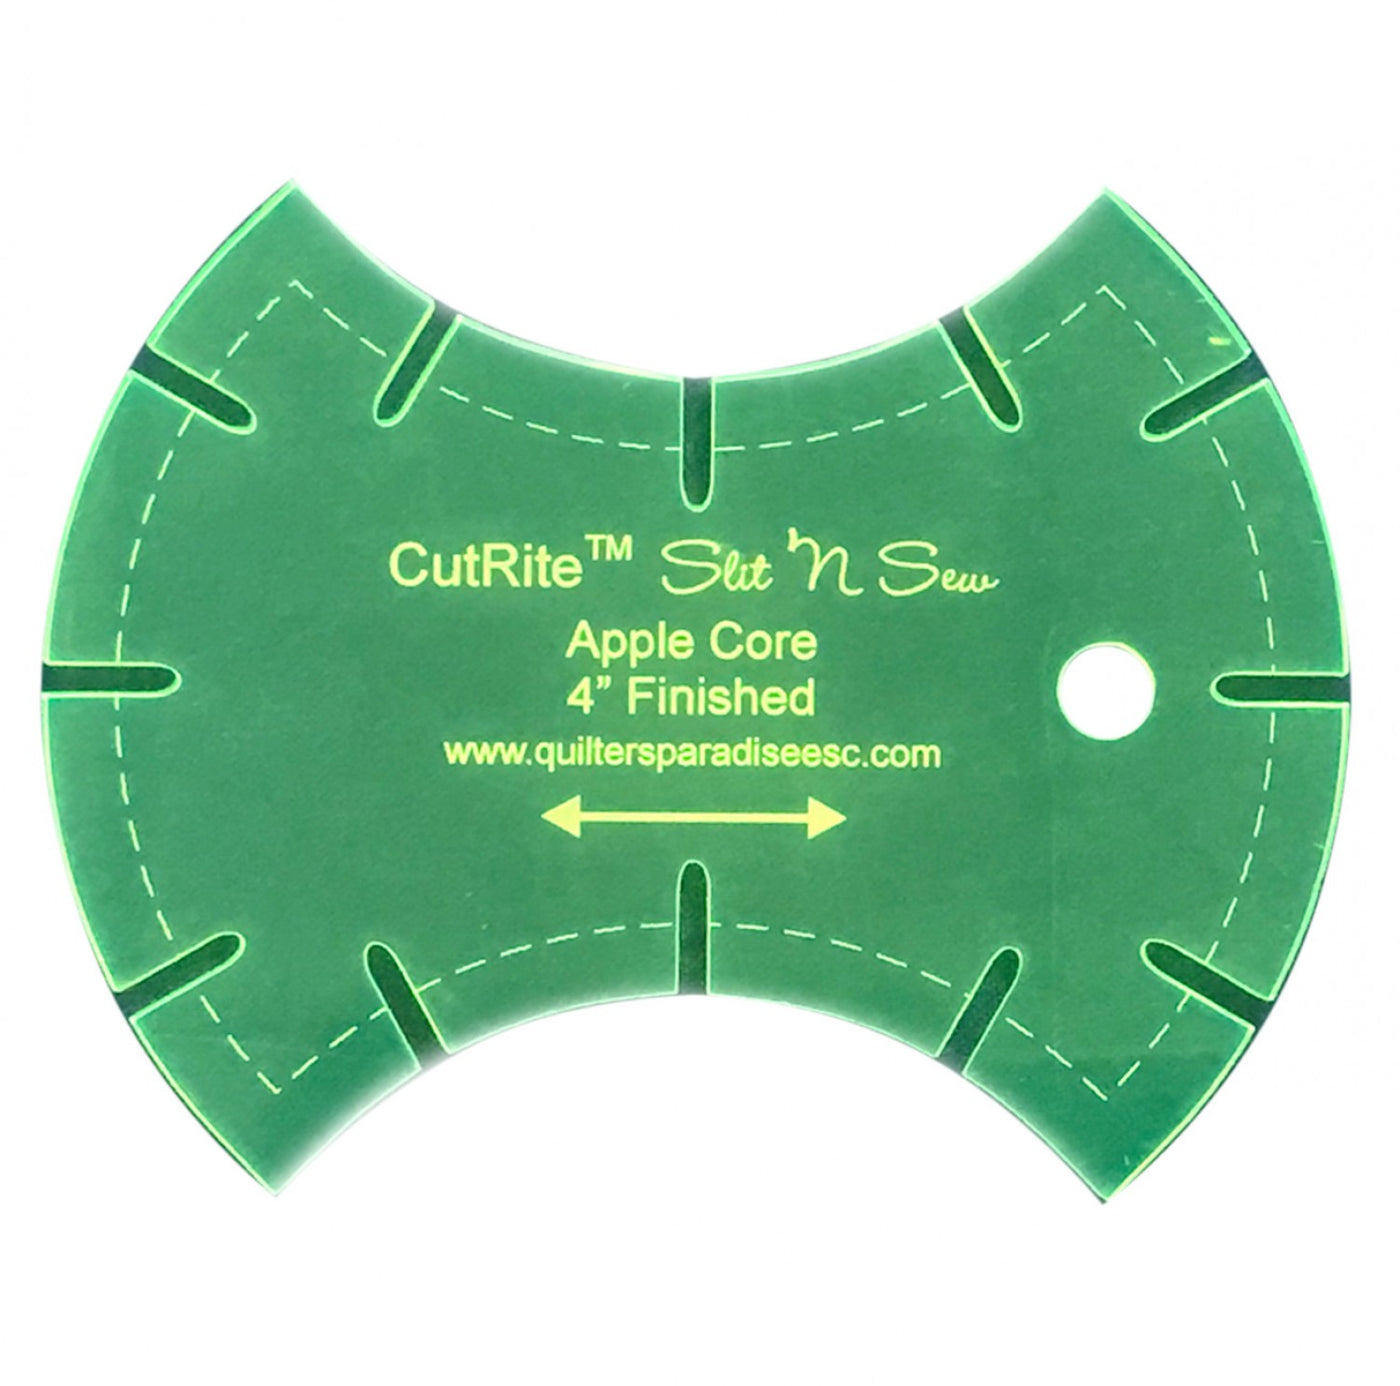 Slit n Sew Apple Core 4 inch acryl mall - Quilters Paradise